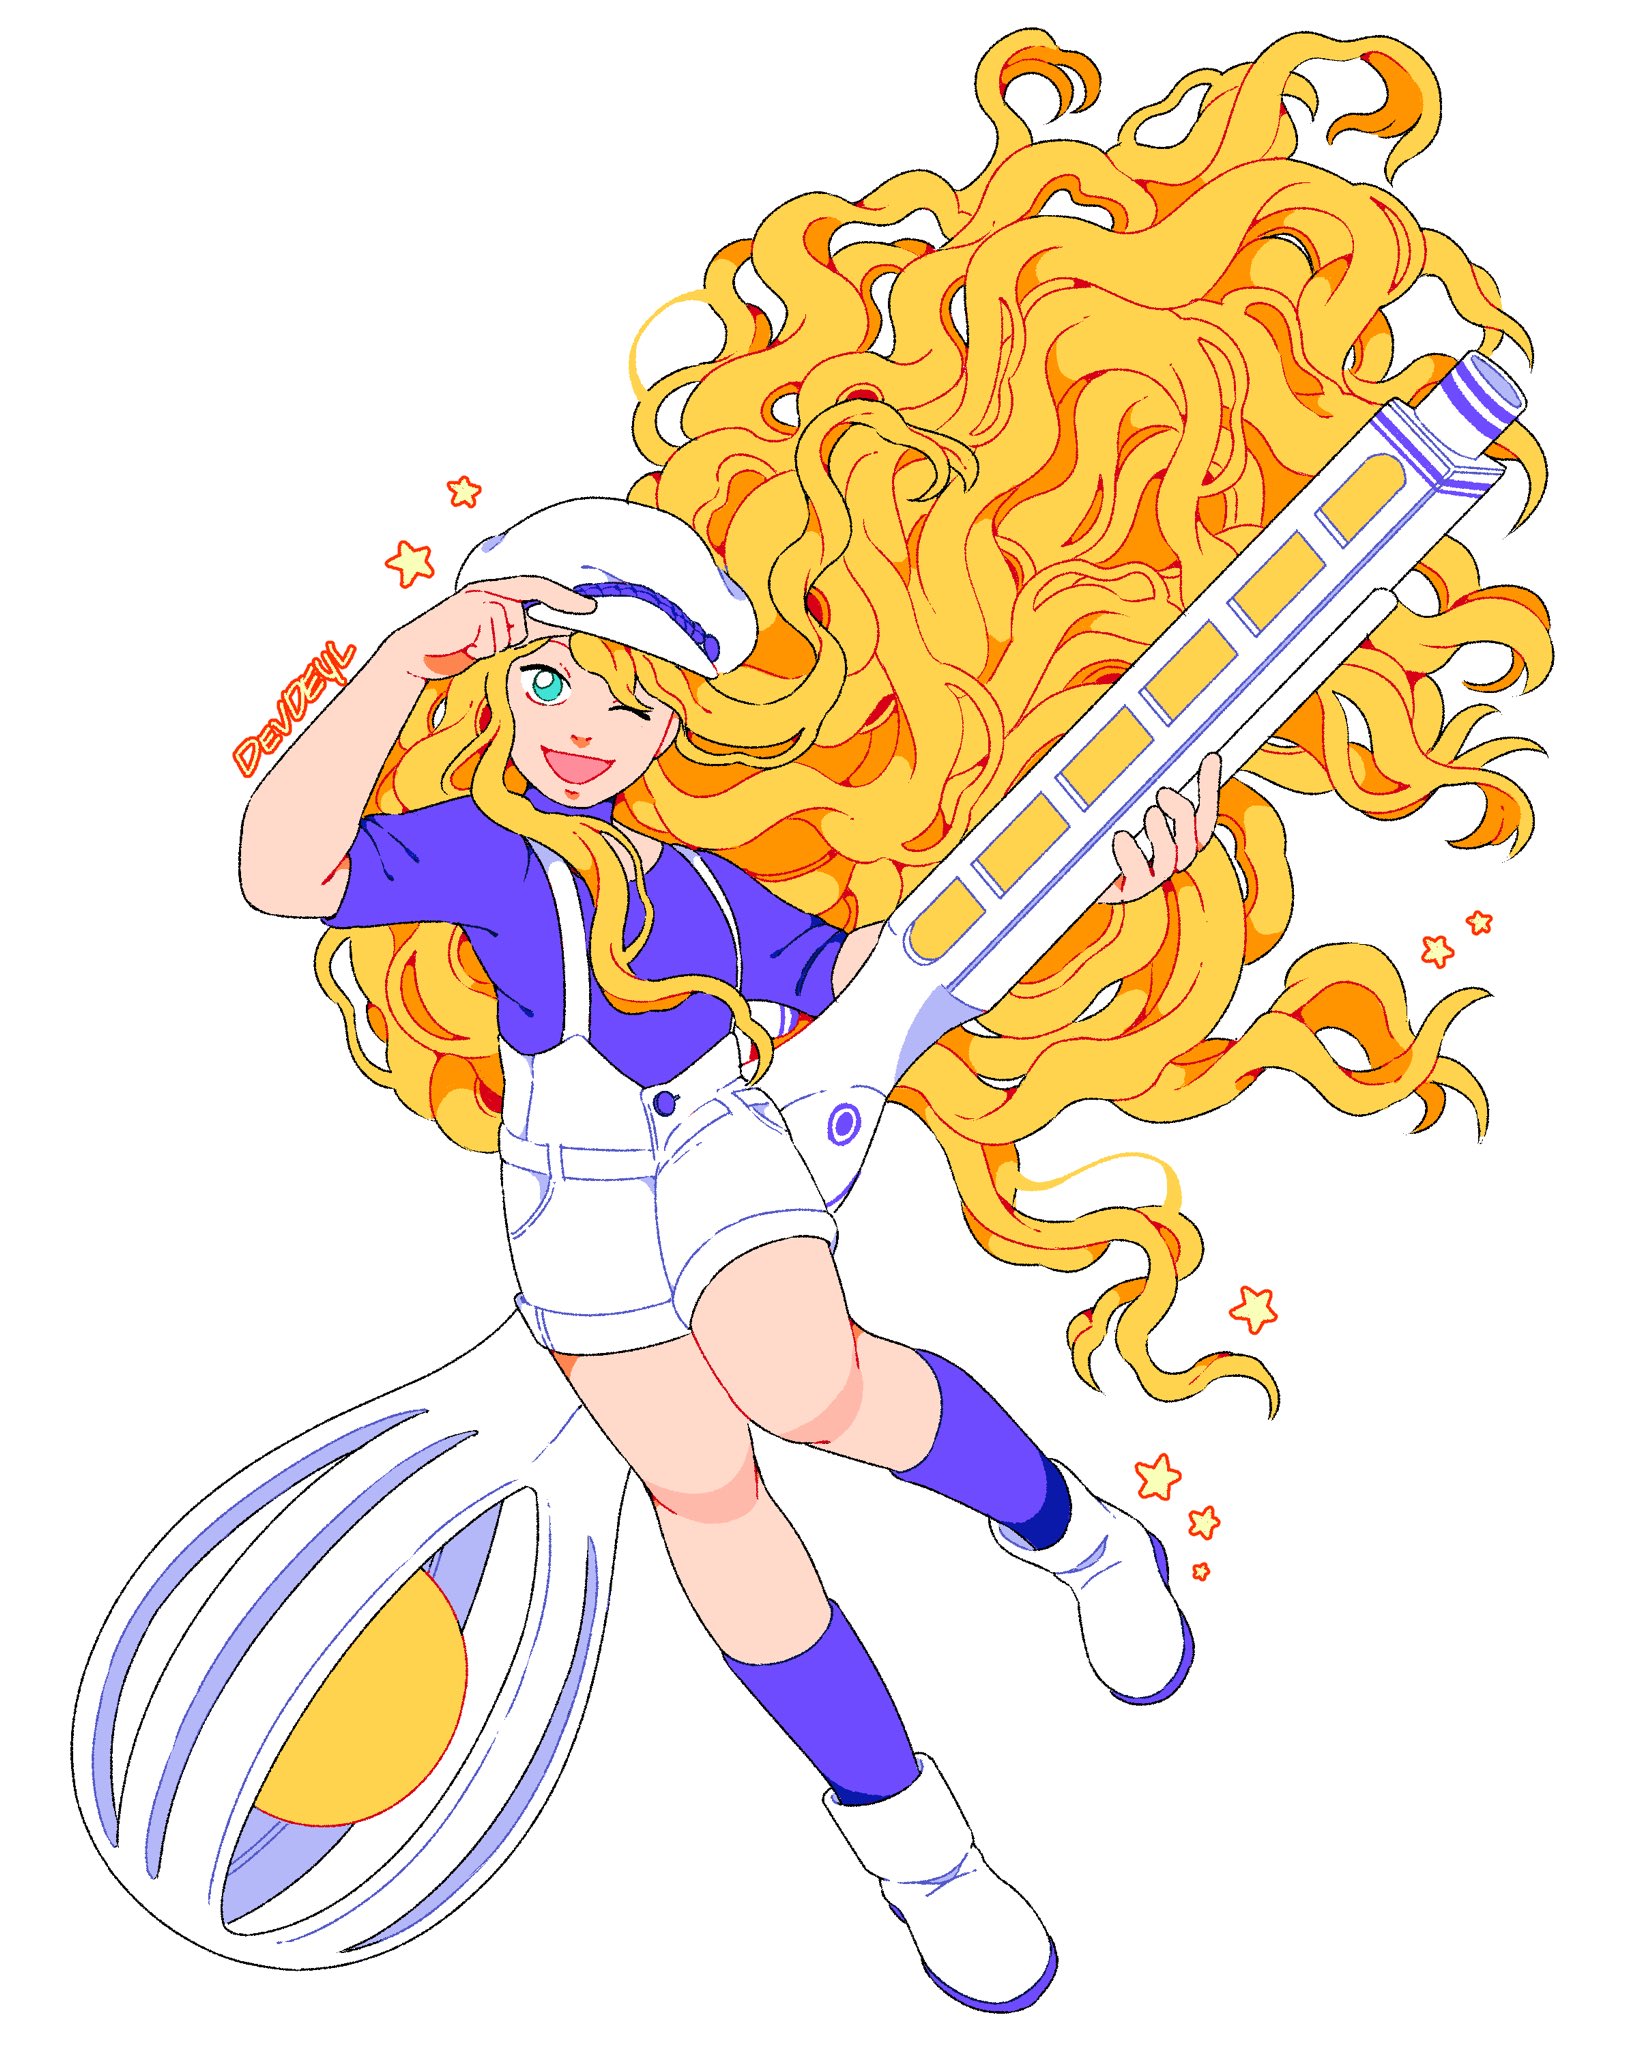 X \ ⭐️ 𝓓𝓮𝓿 ⭐️ | @ Summer Comms ☀️ در X: «Leaked Cherish Redesign Concept  Art For Zatch Bell 2: Electric Boogaloo #zatchbell #金色のガッシュベル  https://t.co/jv3FrSfb9o»